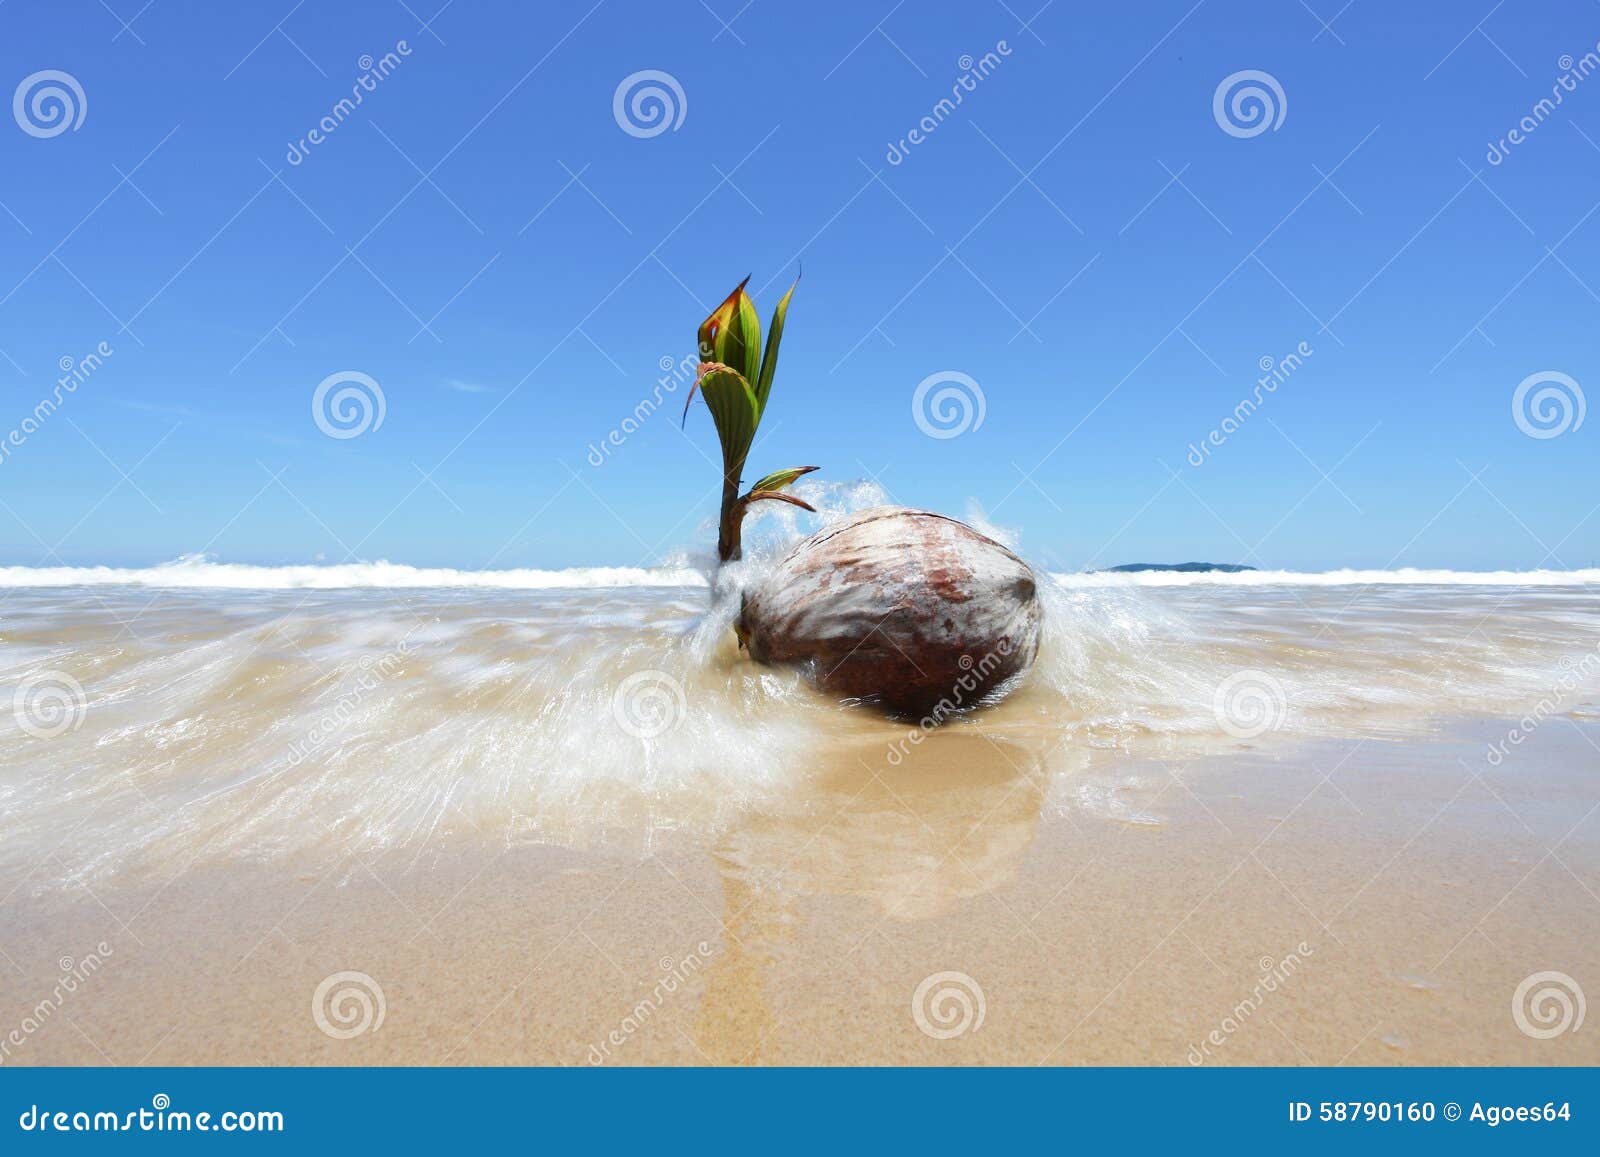 Coconut Seedling on the Shore Stock Photo - Image of determination ...